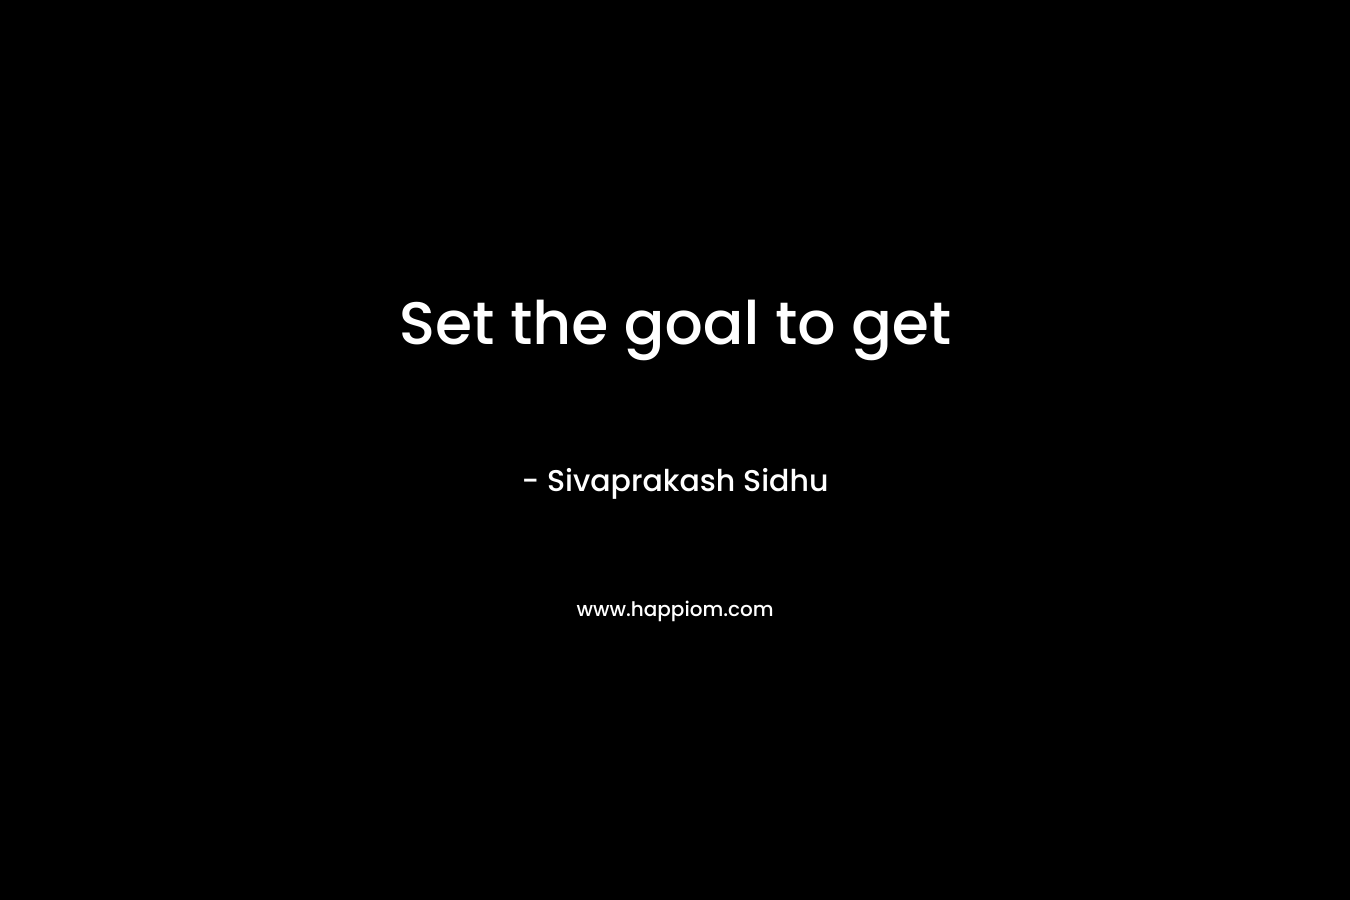 Set the goal to get